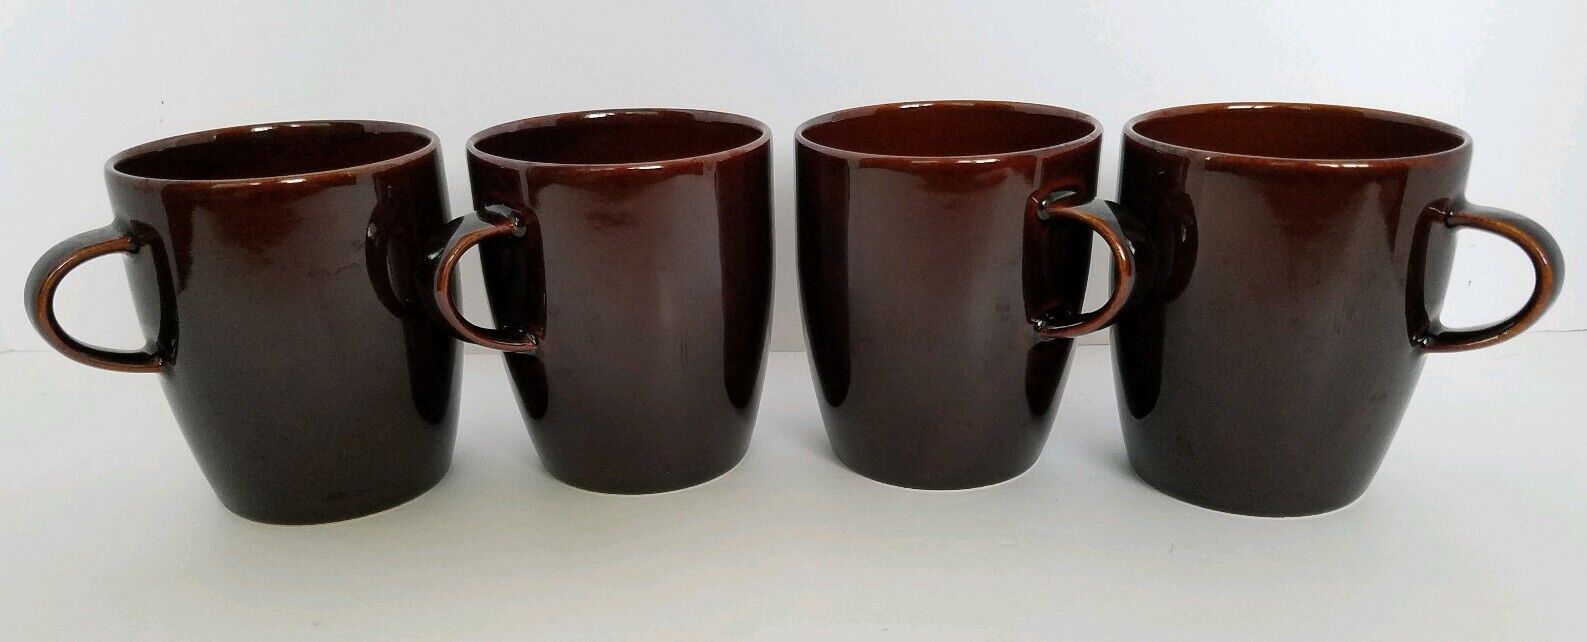 4 Crate & Barrel CBL129 Reddish Brown 12 oz Coffee Mugs EXC Crate and Barrel Does Not Apply